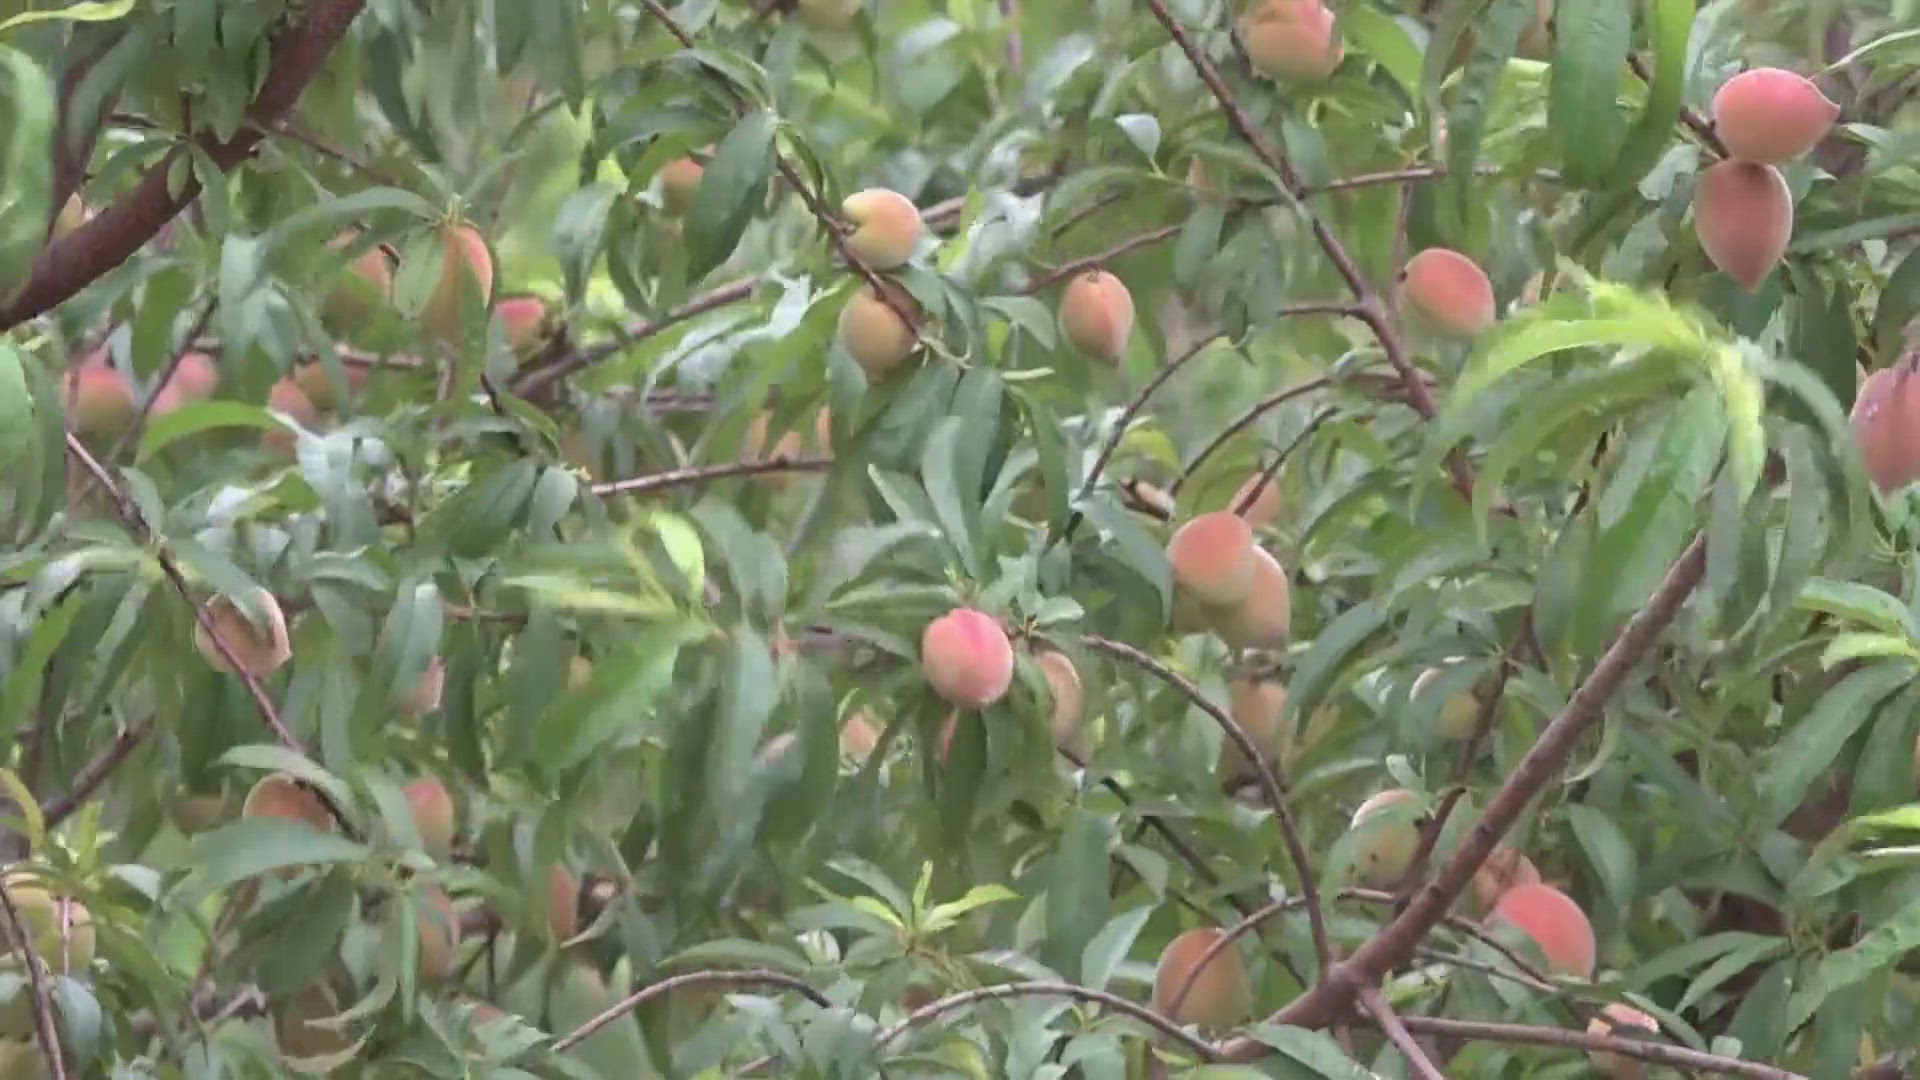 Growers in Gillespie County are hoping this year will be good year for peaches as harvest season arrives.